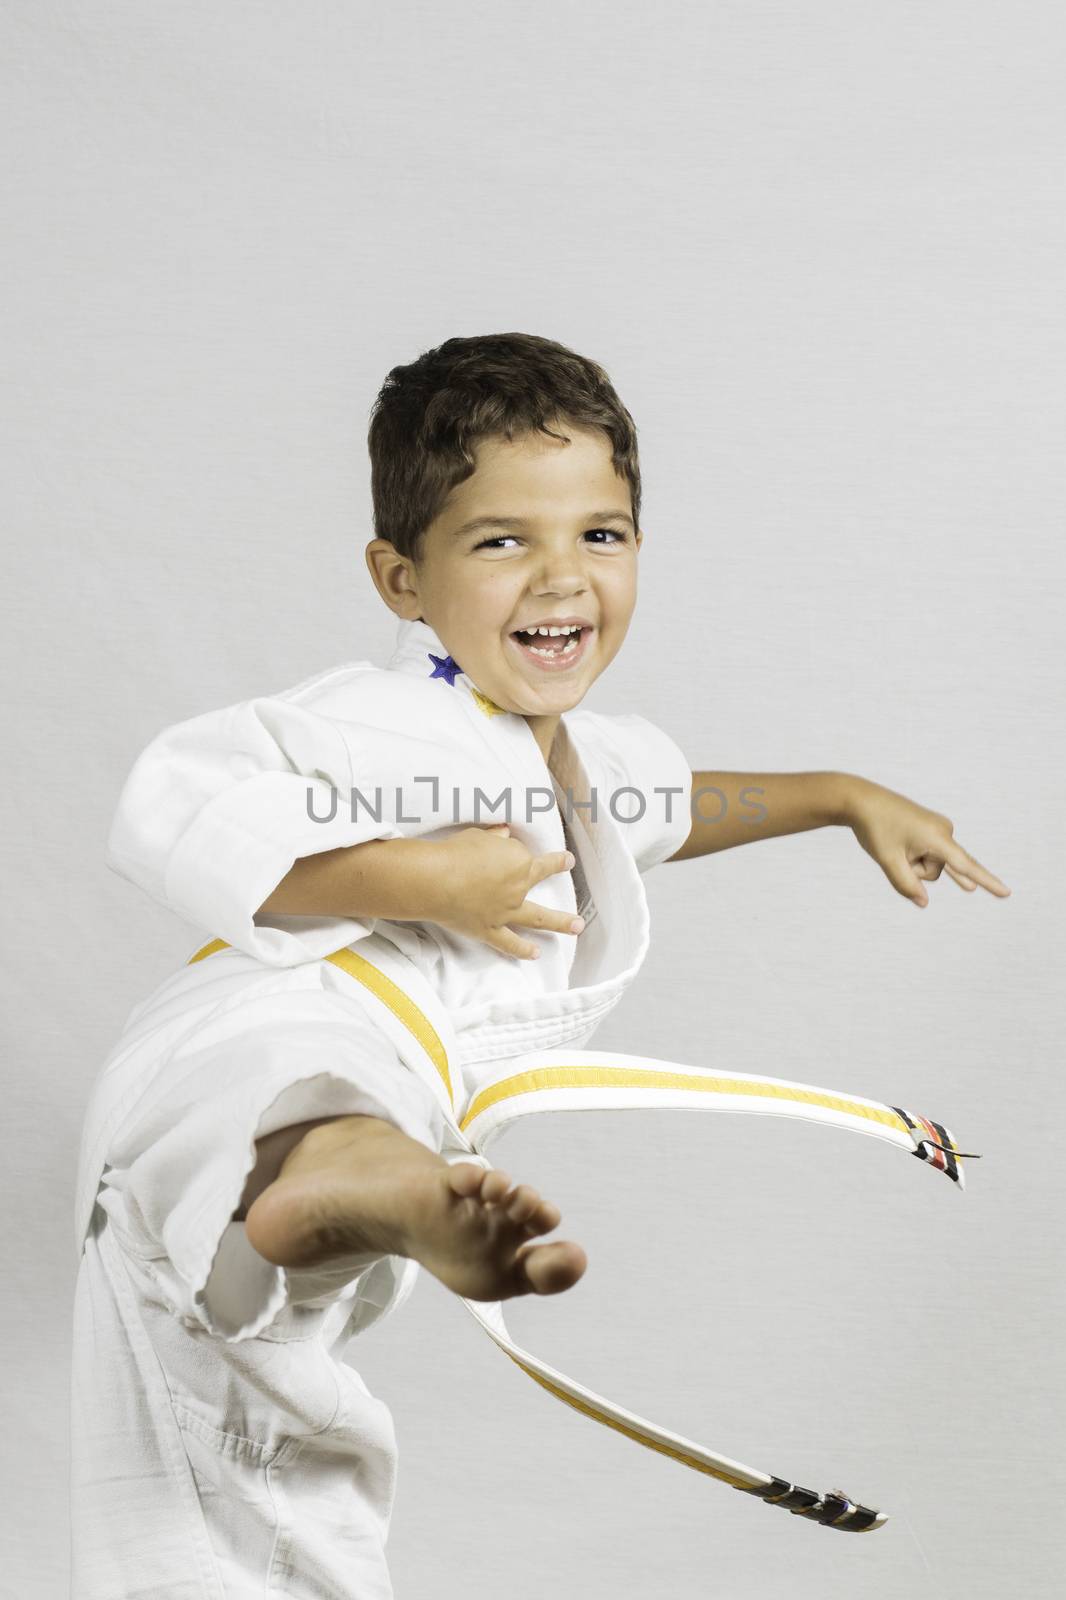 A young boy jumping and kicking dressed in a karate uniform.